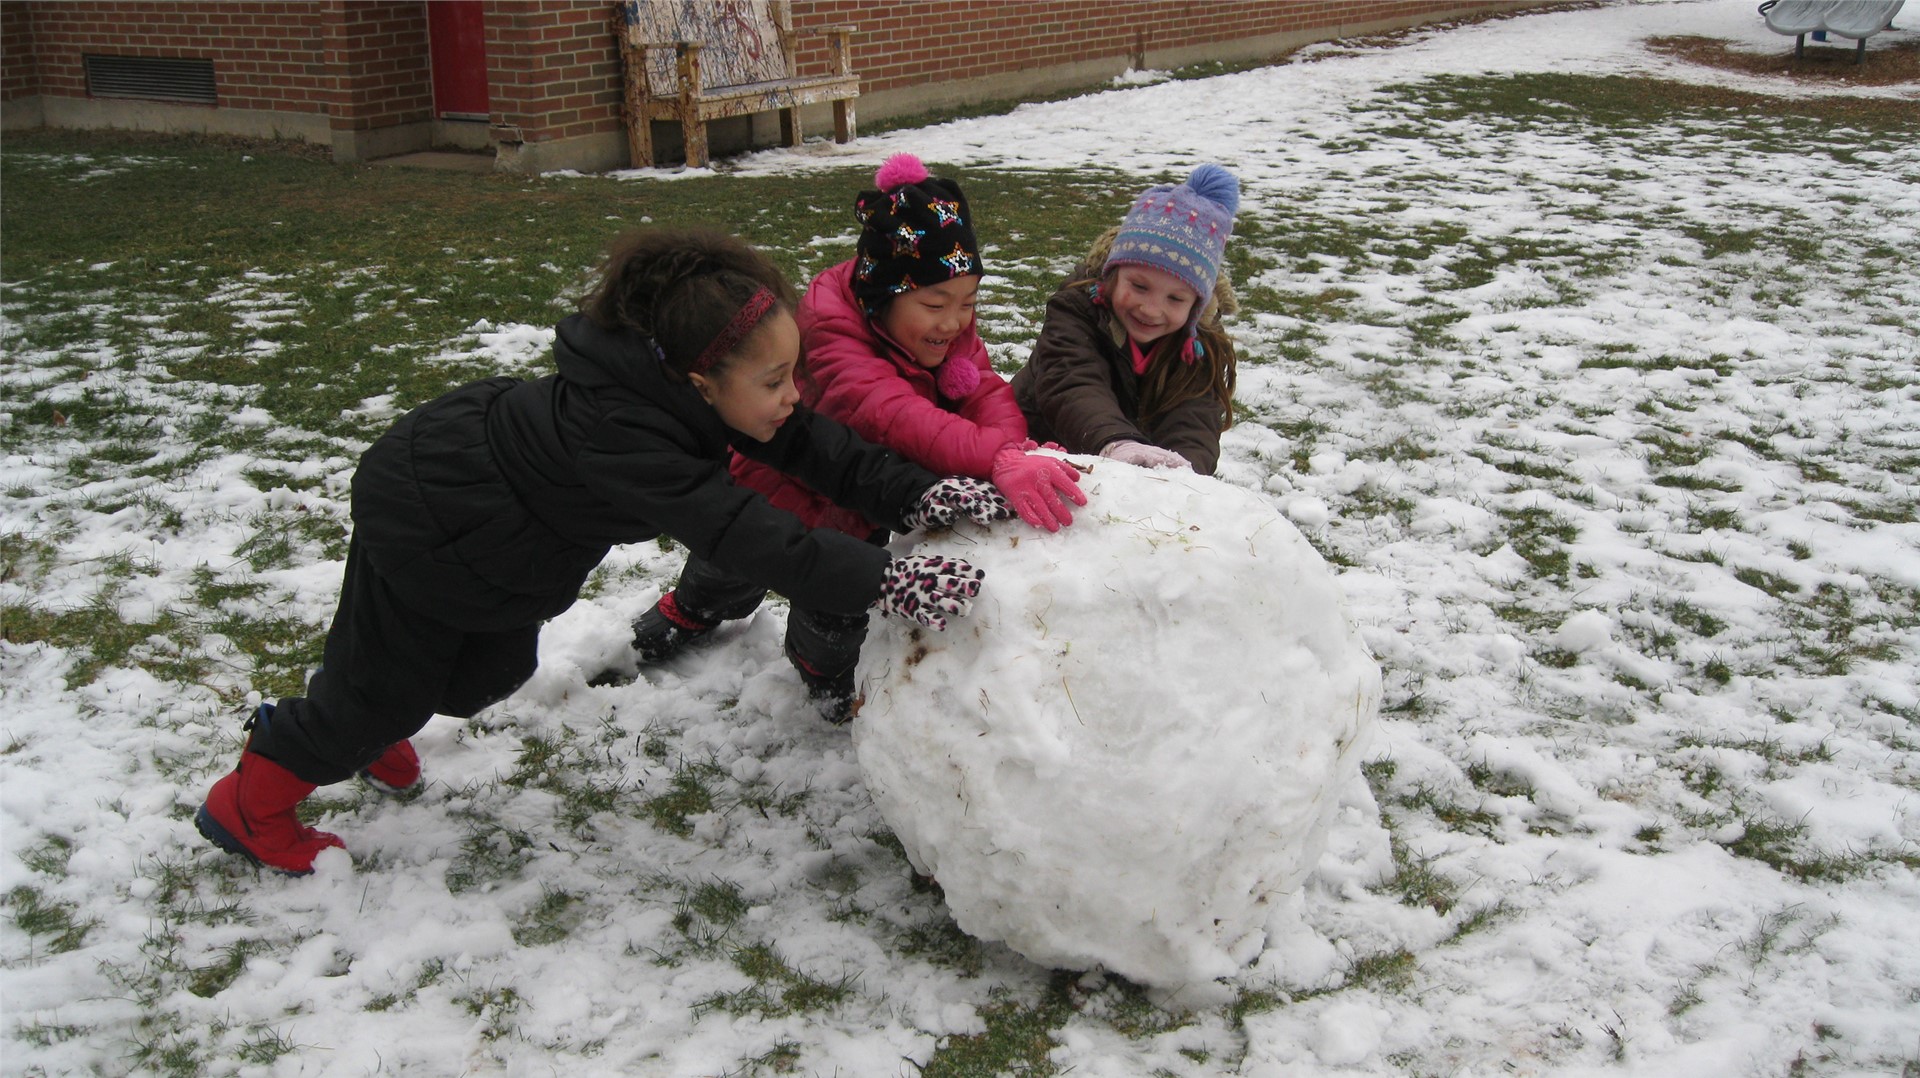 Great day to make a snowman!